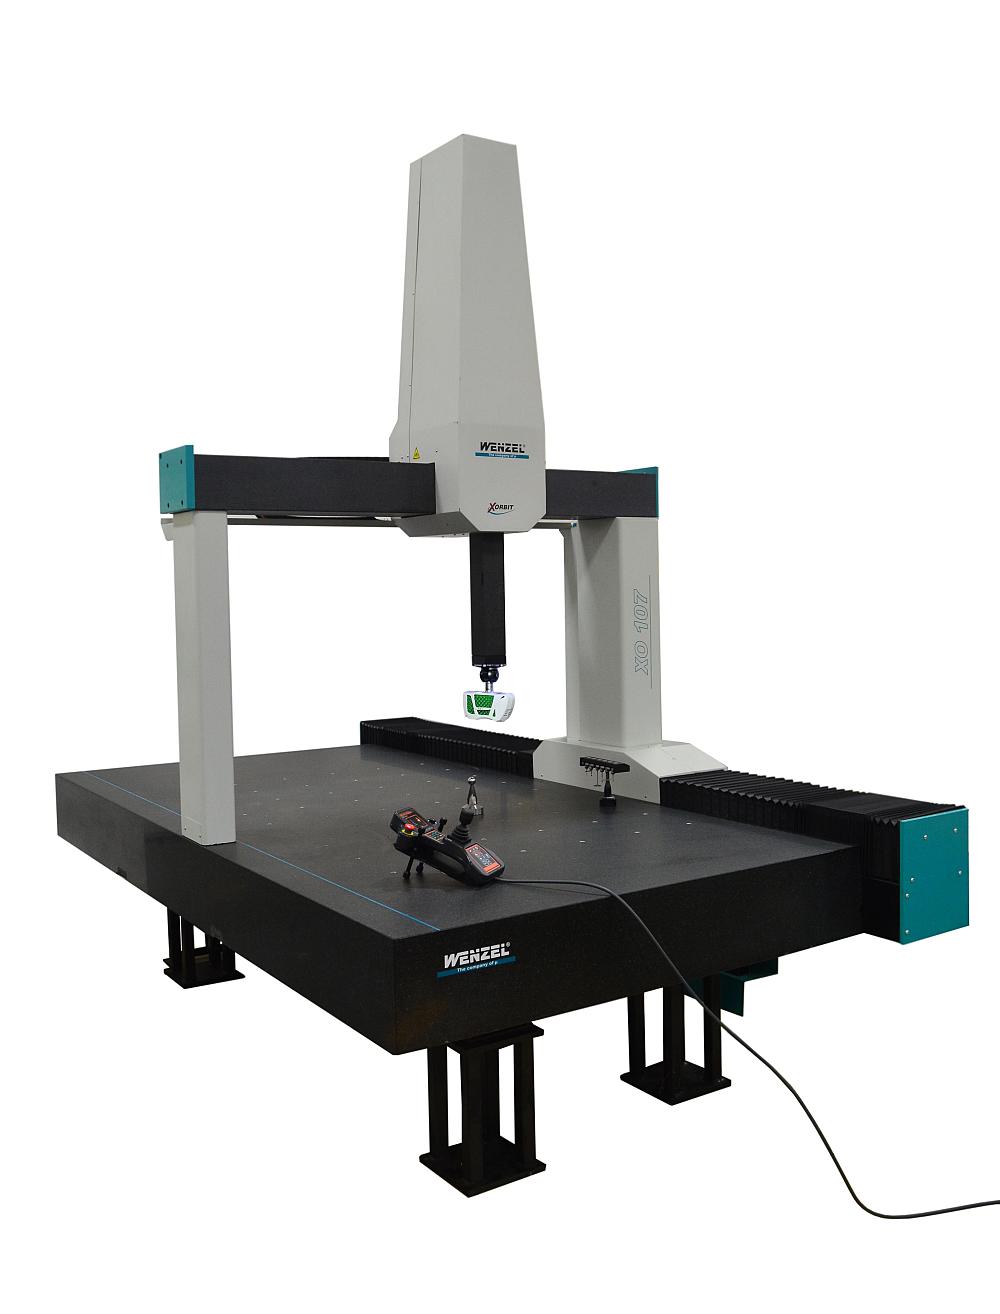 Newly “Repurposed” Wenzel CMM with TouchDMIS and Perceptron ScanR laser scanner added.
